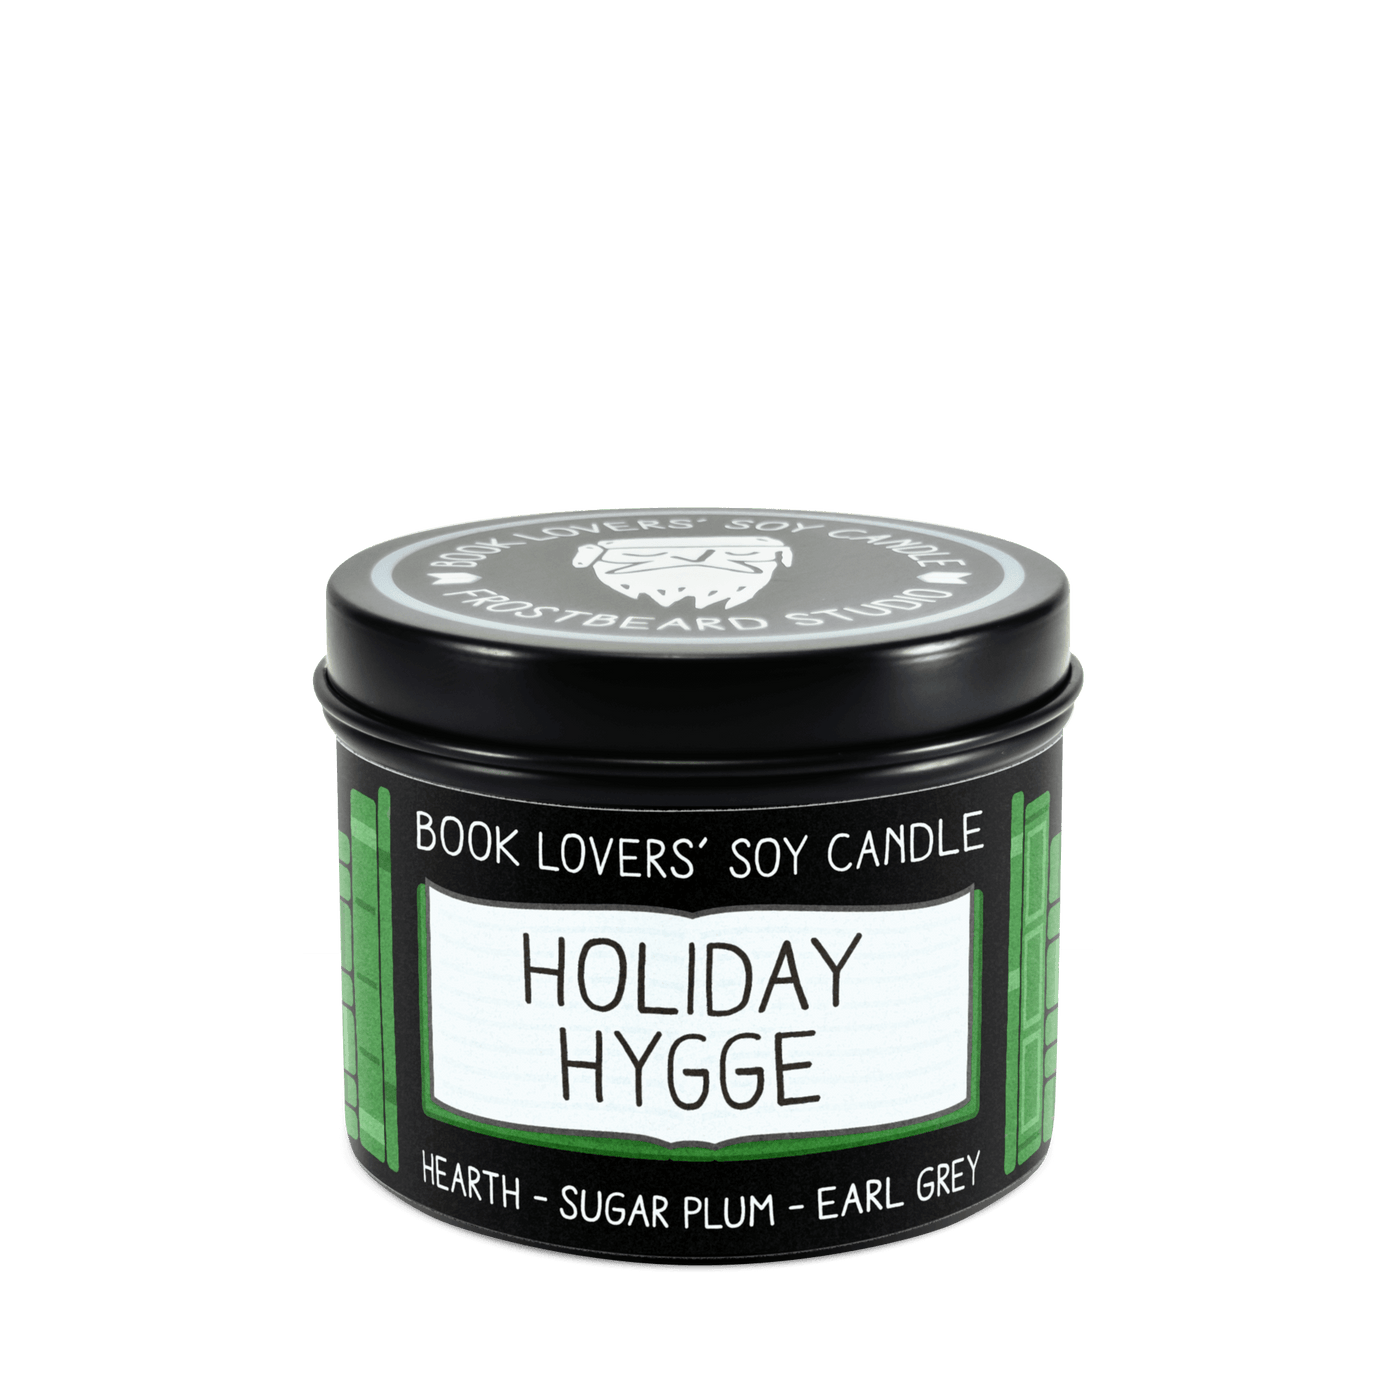 Holiday Hygge - 4 oz Tin - Book Lovers' Soy Candle - Frostbeard Studio